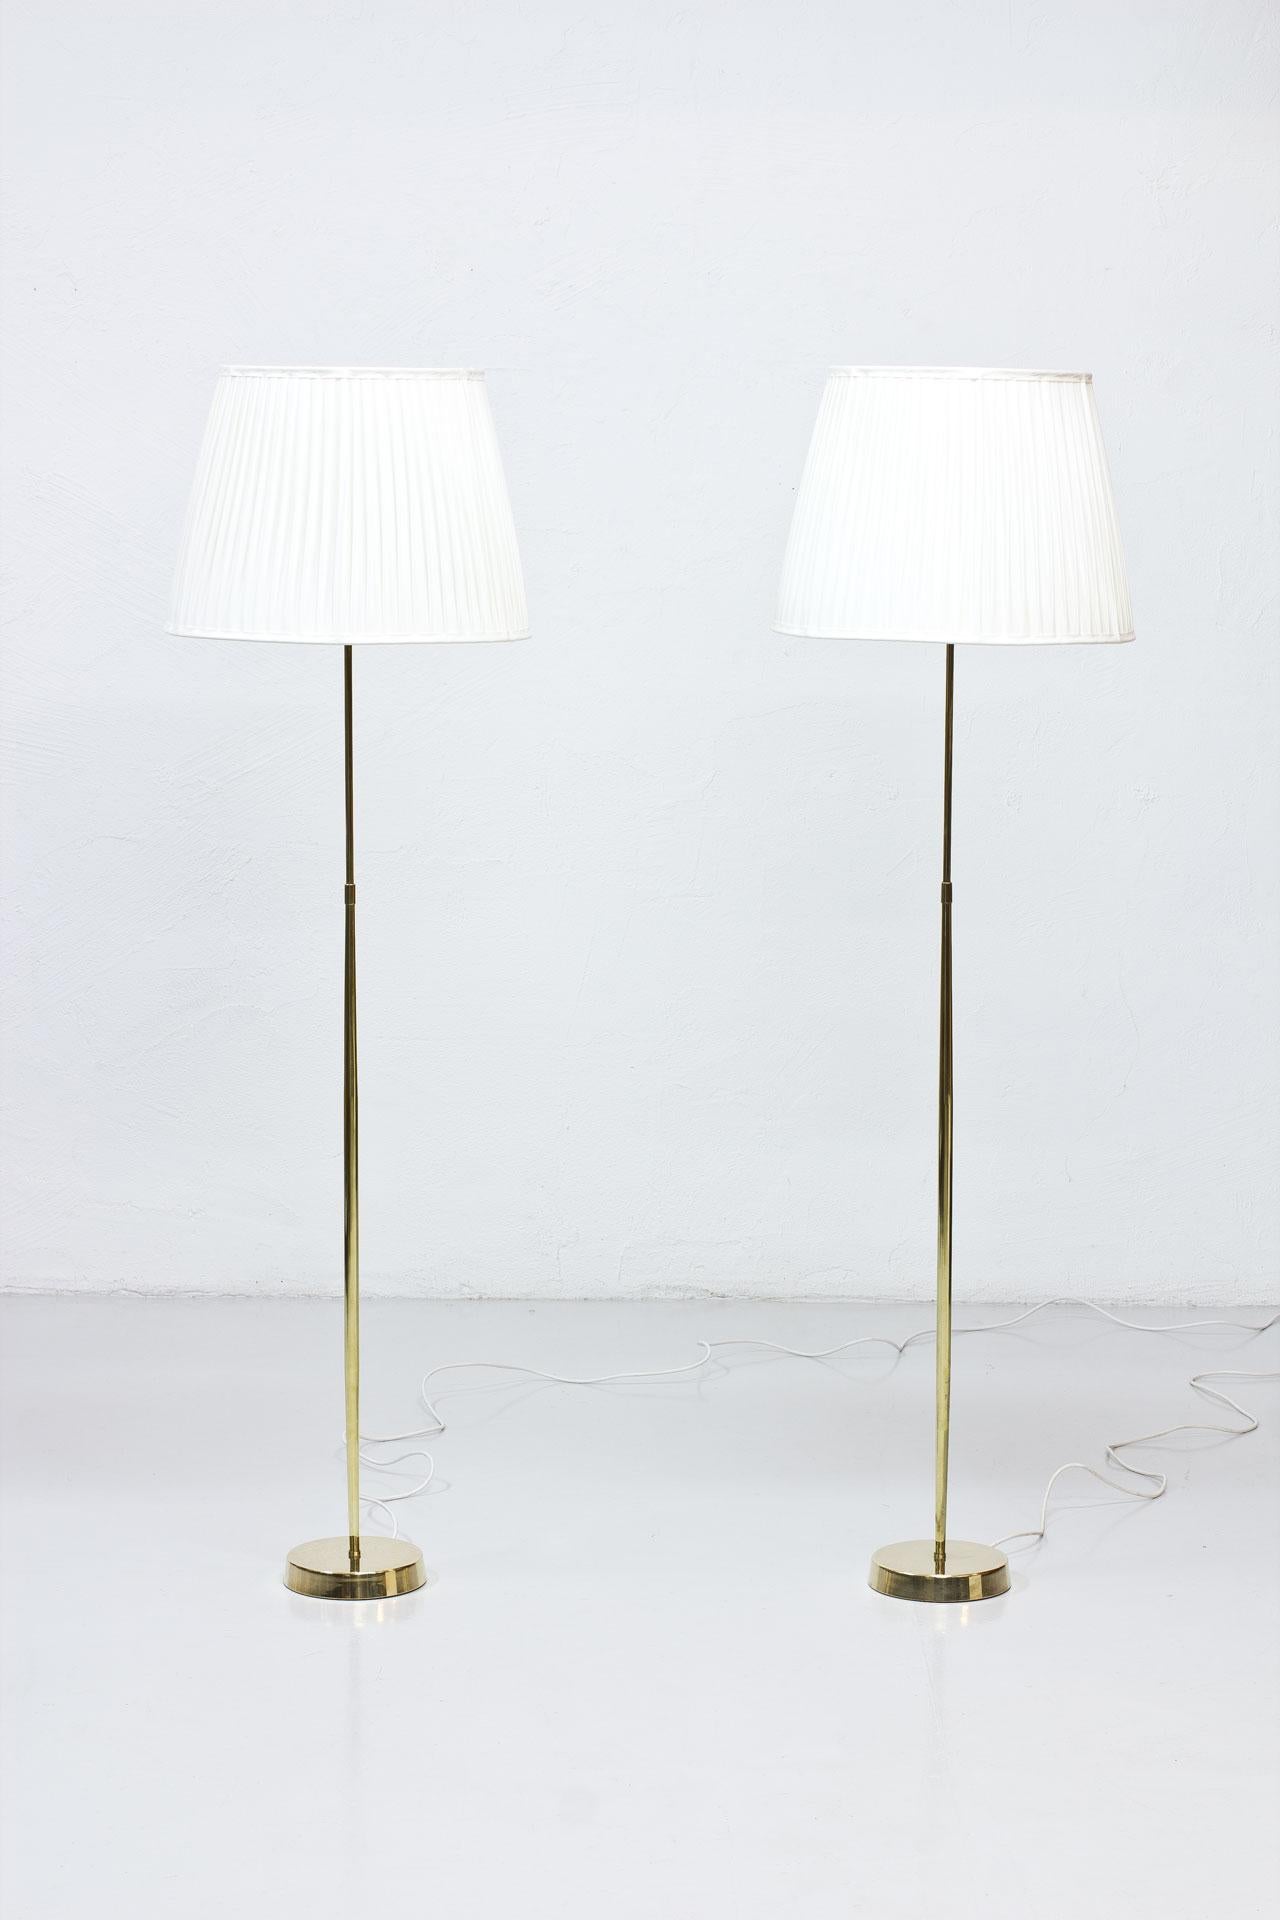 Elevate your space with this exquisite pair of vintage ASEA Belysning floor lamps, crafted in Sweden during the 1950s. These lamps are a harmonious blend of elegance and functionality, designed to bring timeless sophistication to your home.

Each